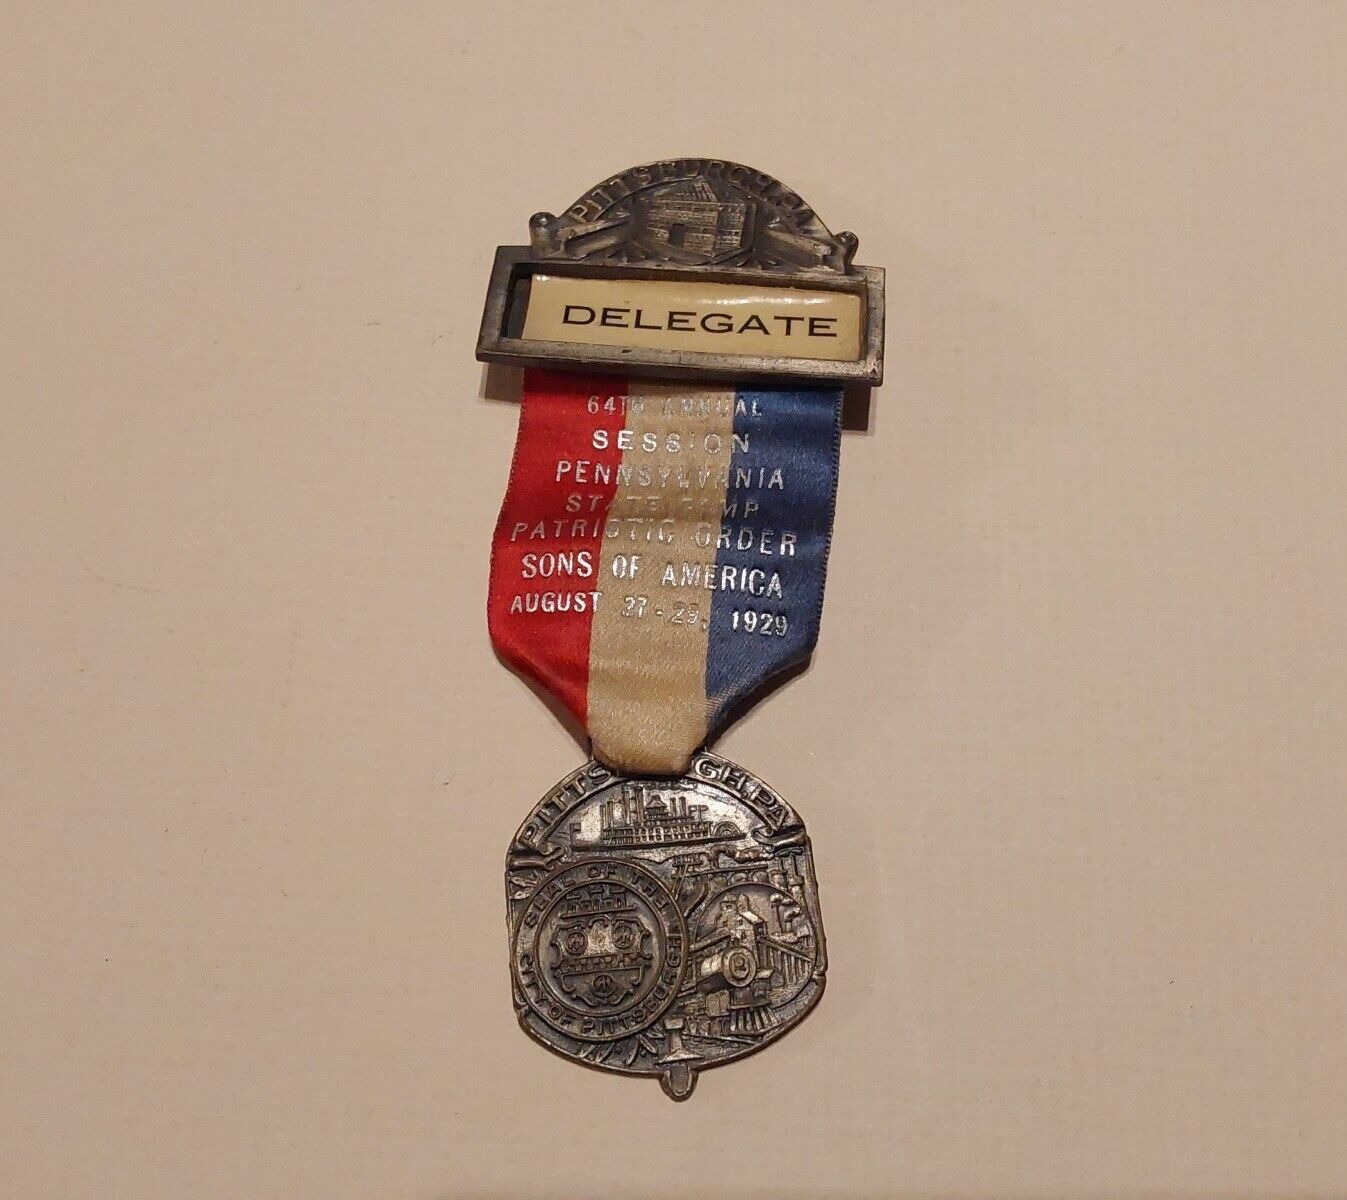 Pittsburgh PA 1929 P.O.S. of A. PA Convention Badge Medal Sons of America